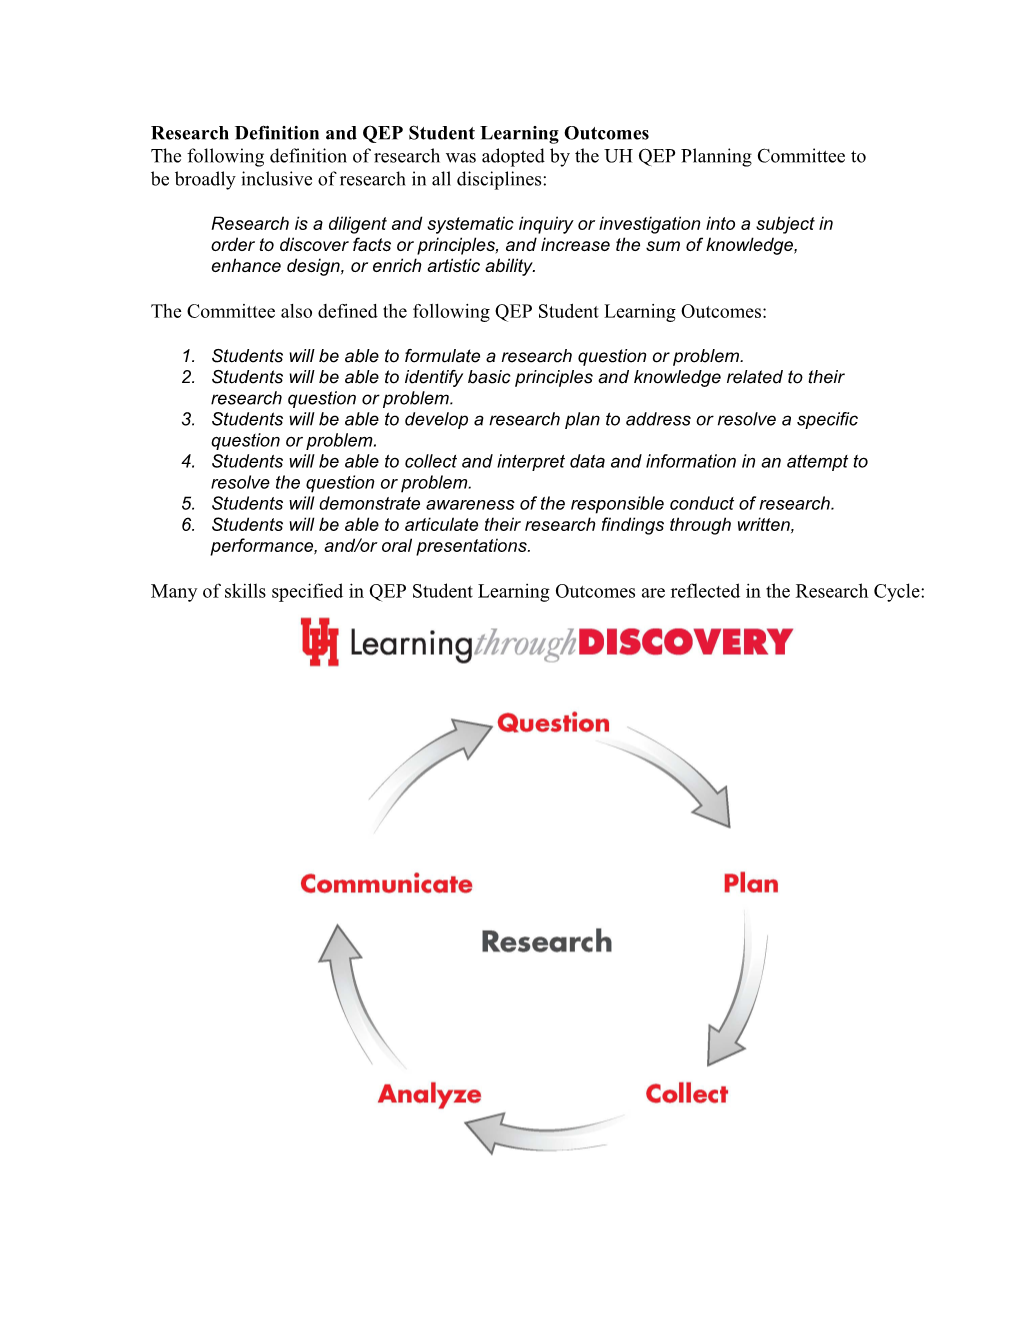 Research Definition and QEP Student Learning Outcomes